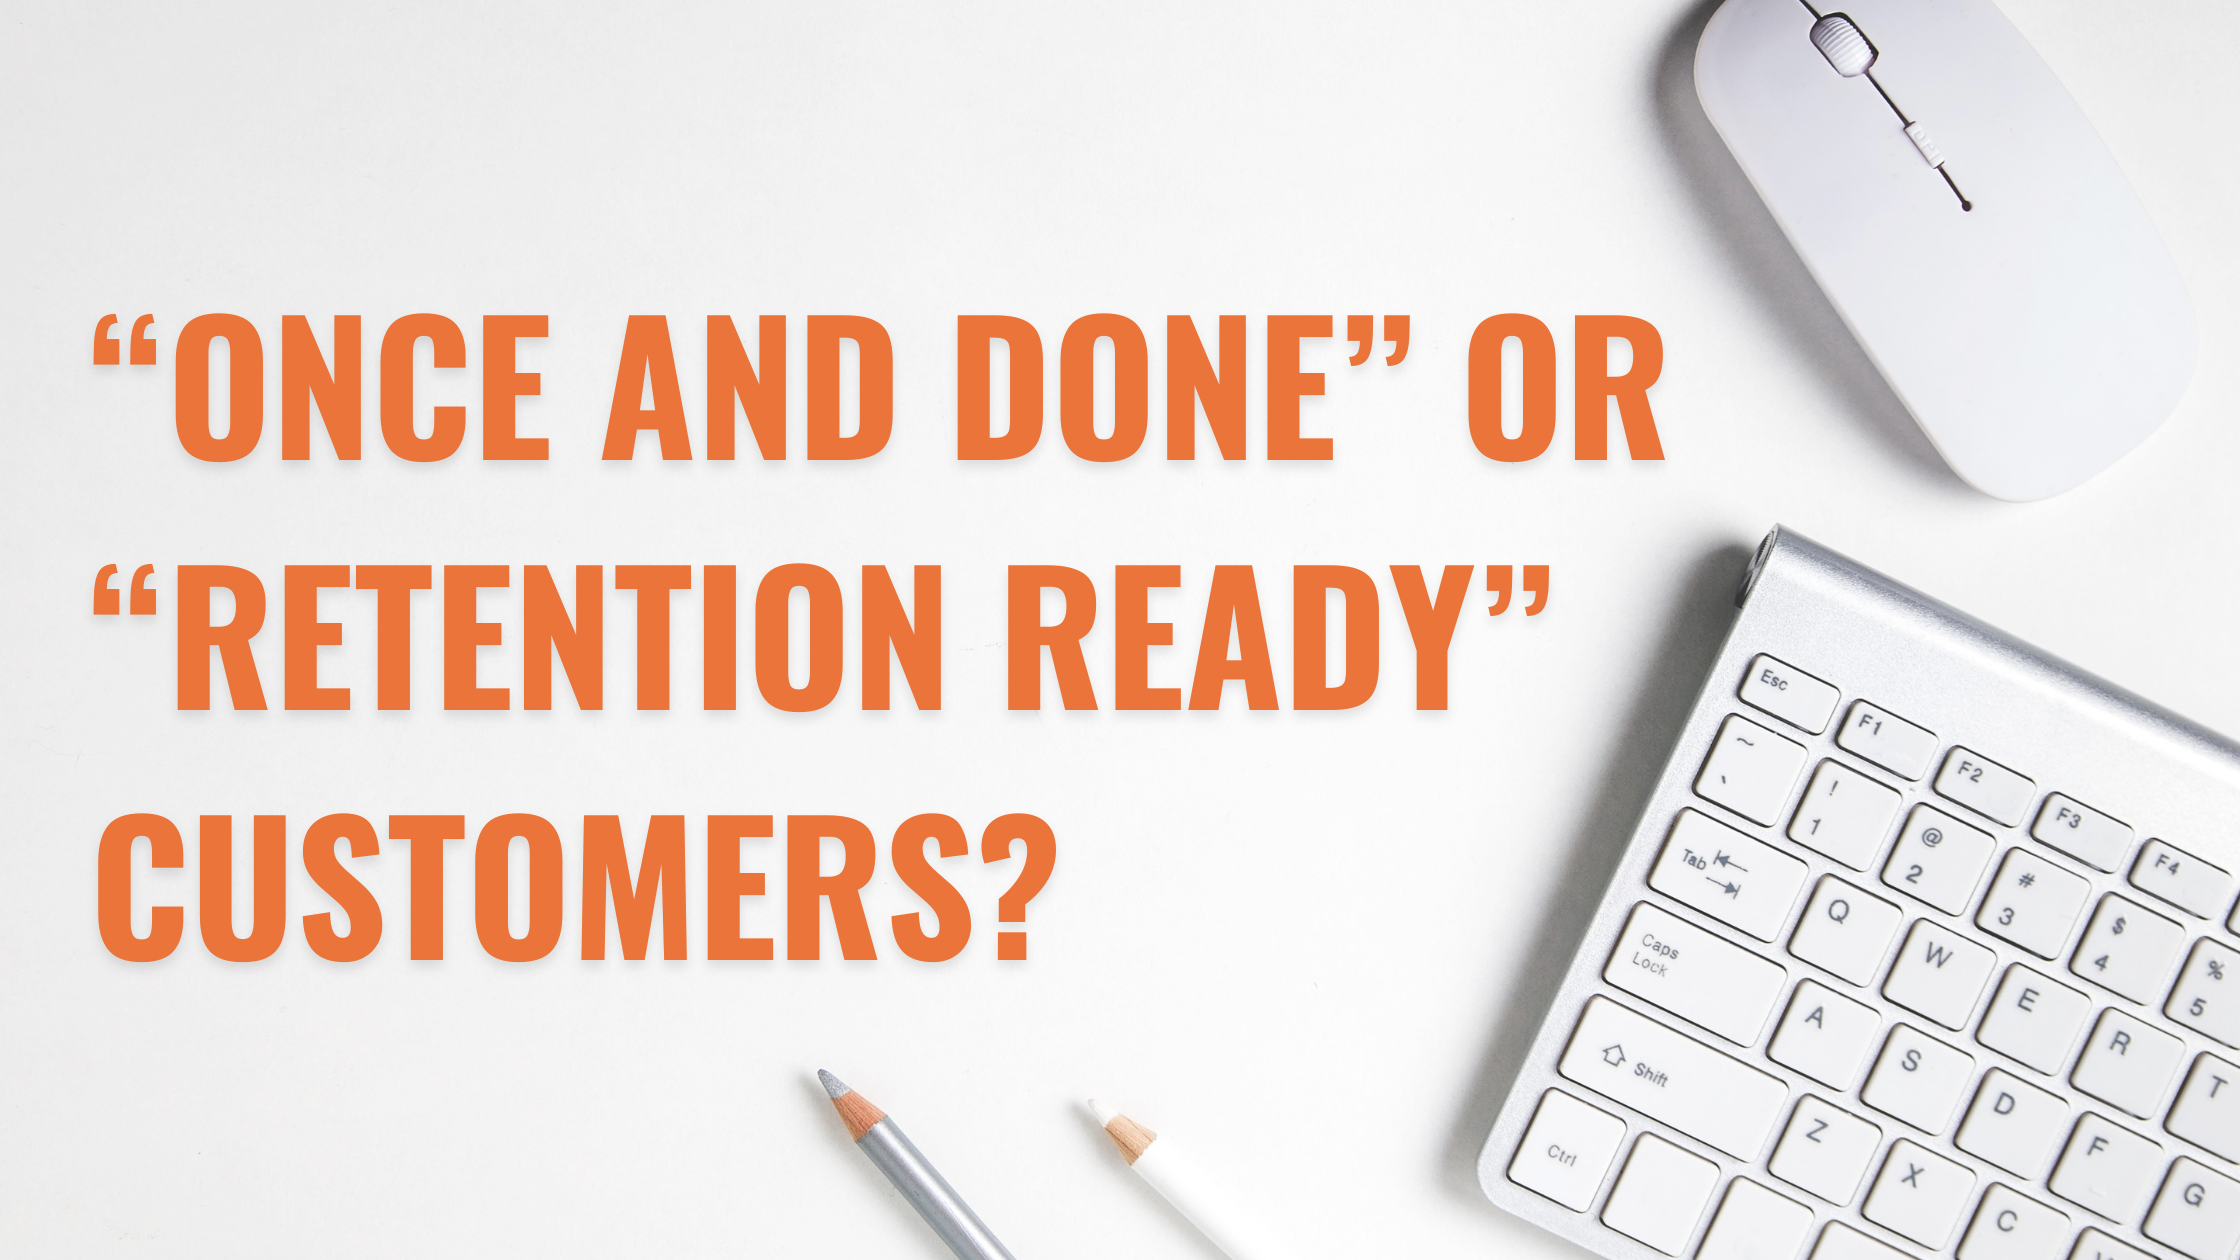 Are you attracting “once and done” or “retention ready” customers for your CPG/DTC brand?